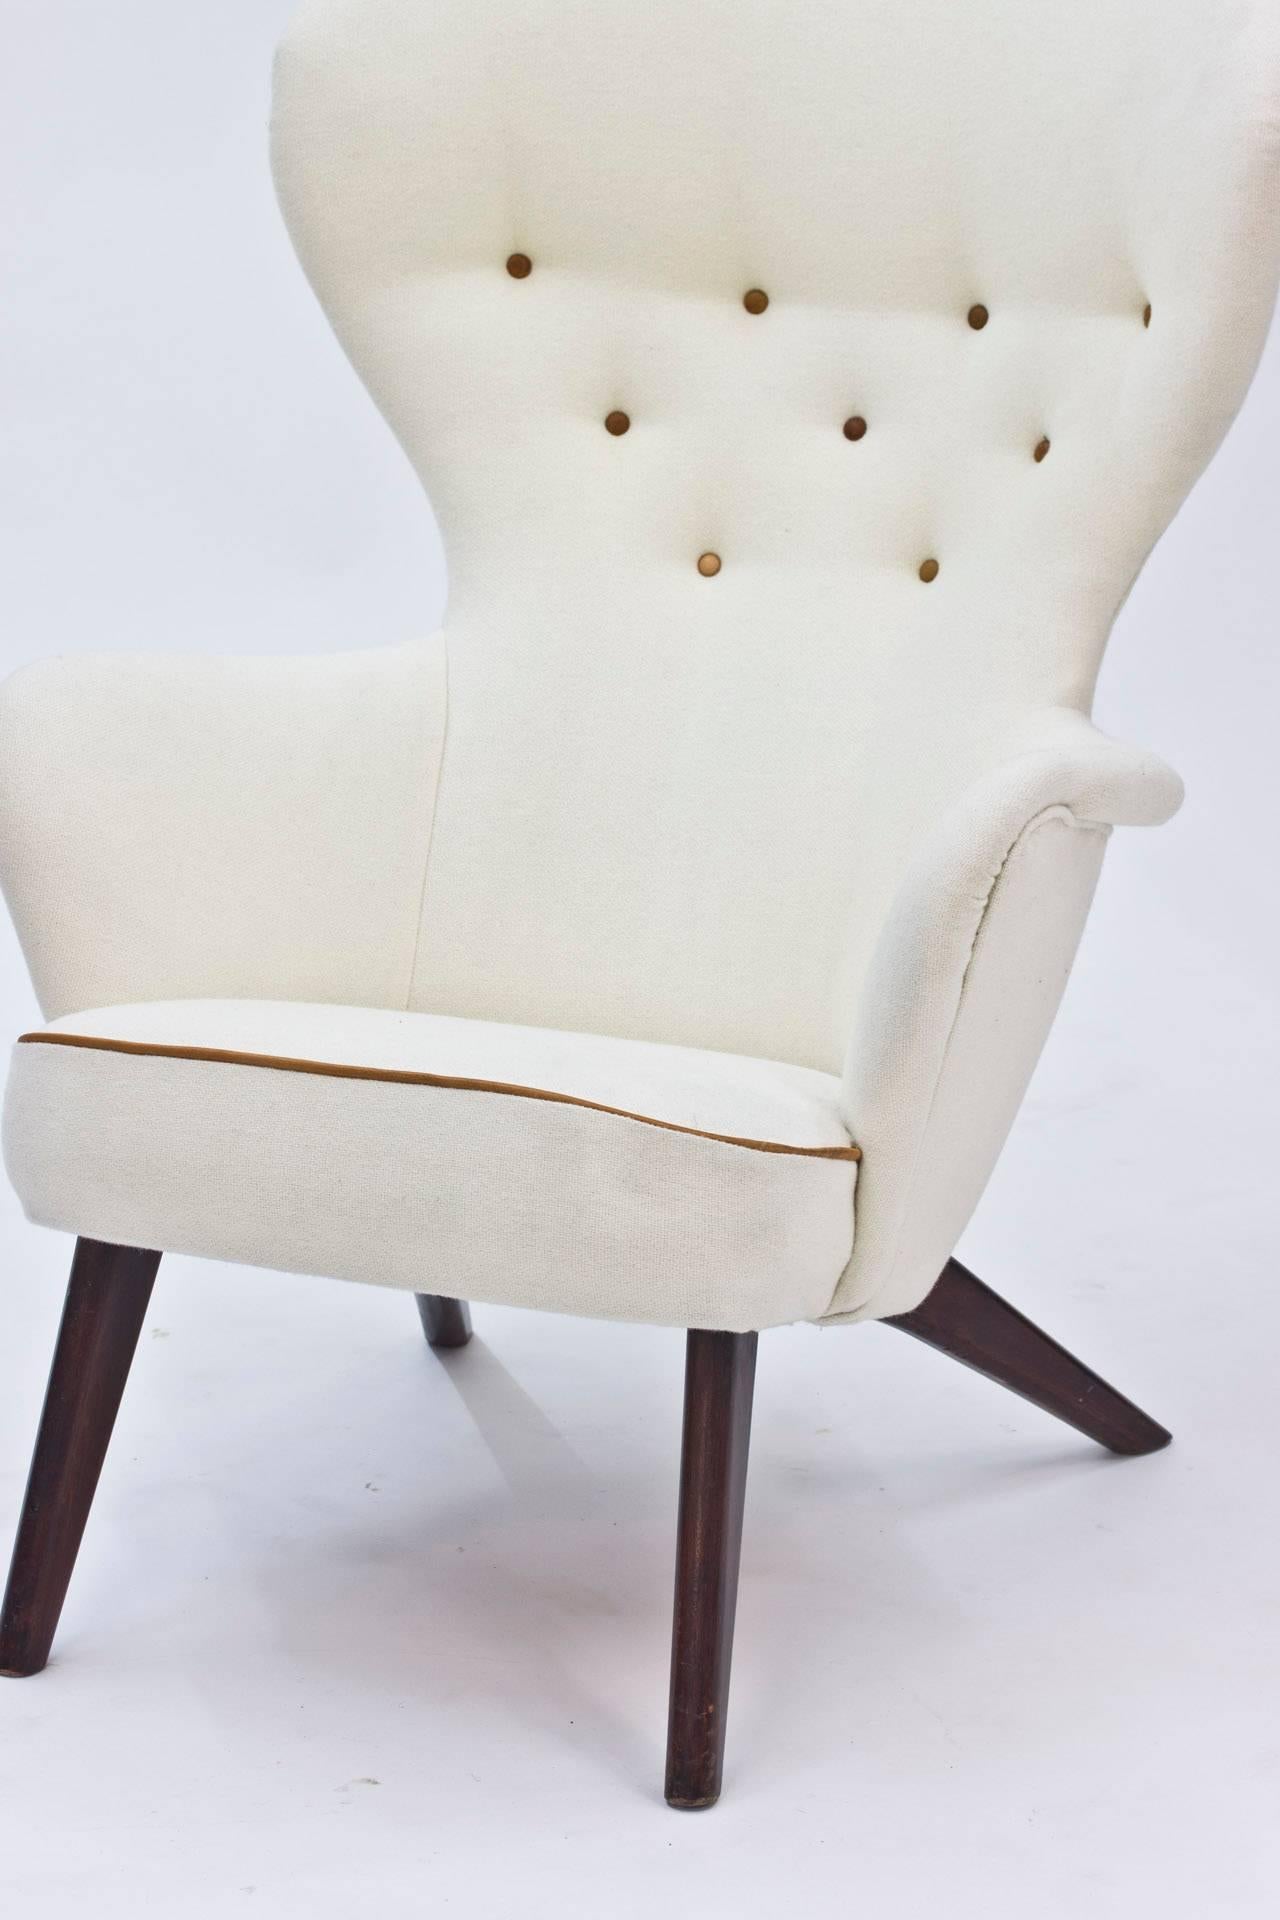 Awesome armchair by Finnish designer Gustaf Hiort af Ornäs, made in the 1950s. Neatness and edginess in a perfect combination. Stained wooden legs, white Kvadrat upholstery with cognac colored leather details.